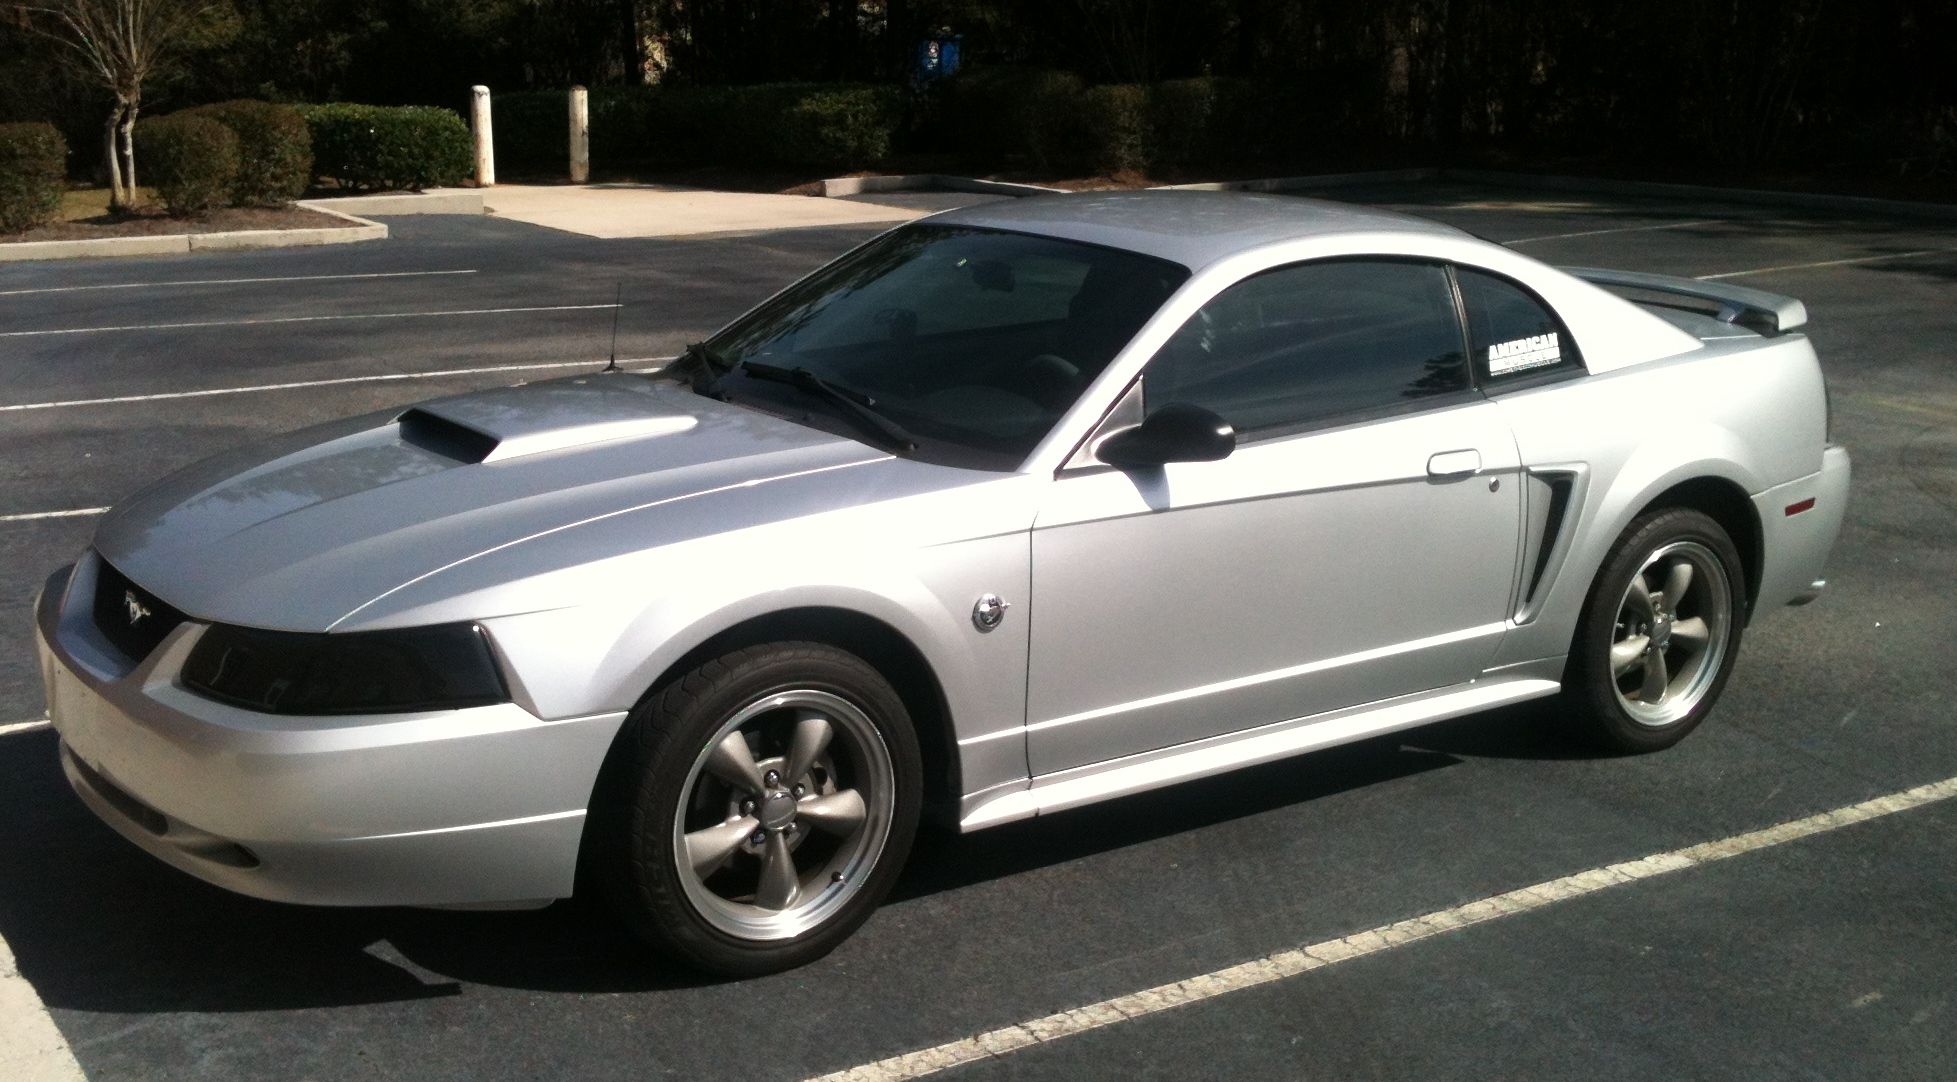 Silver 2004 Ford Mustang